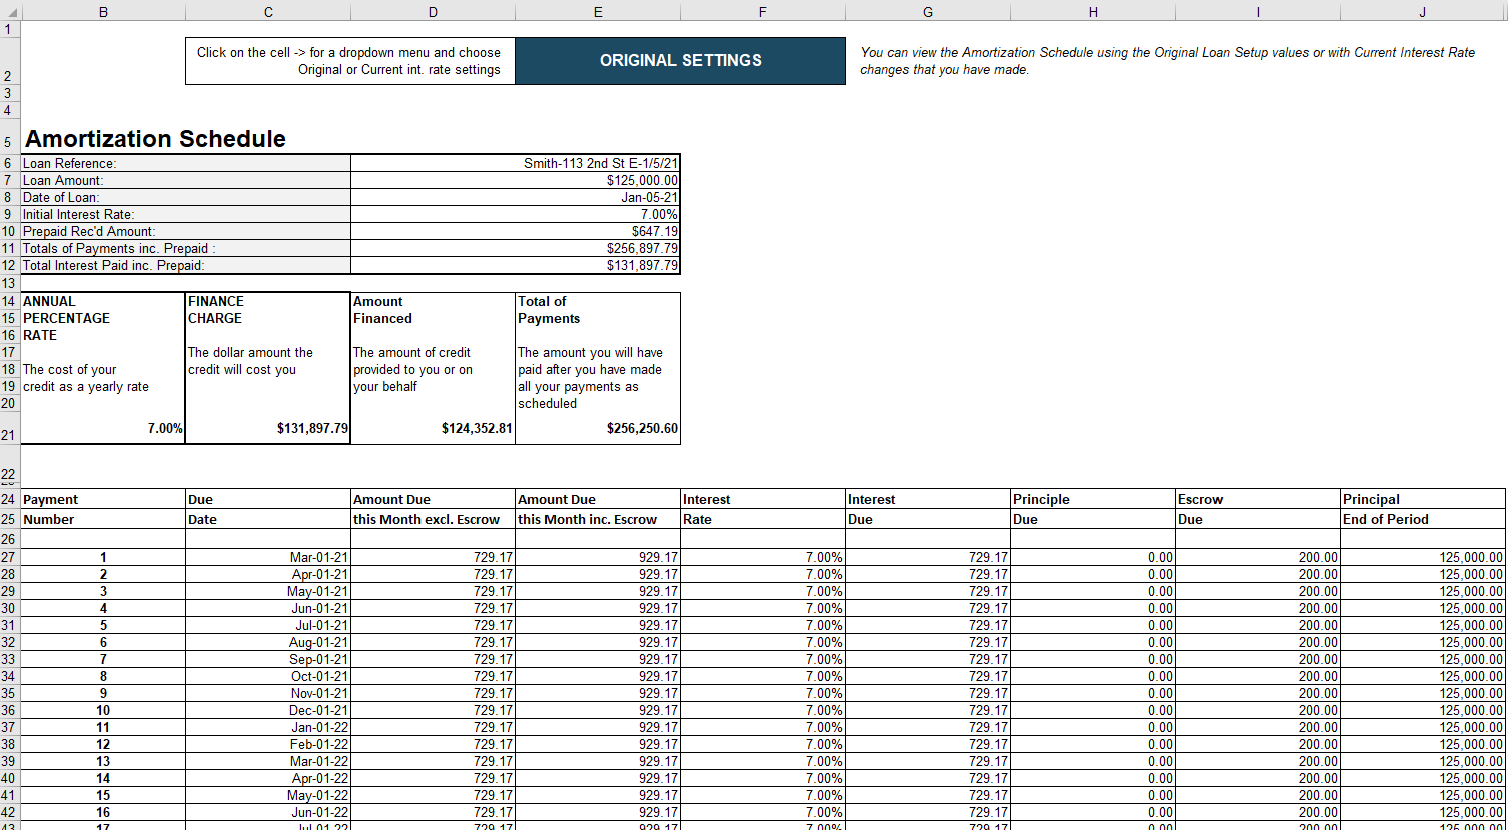 Example Amortization Schedule for a loan of $125,000 at 7%